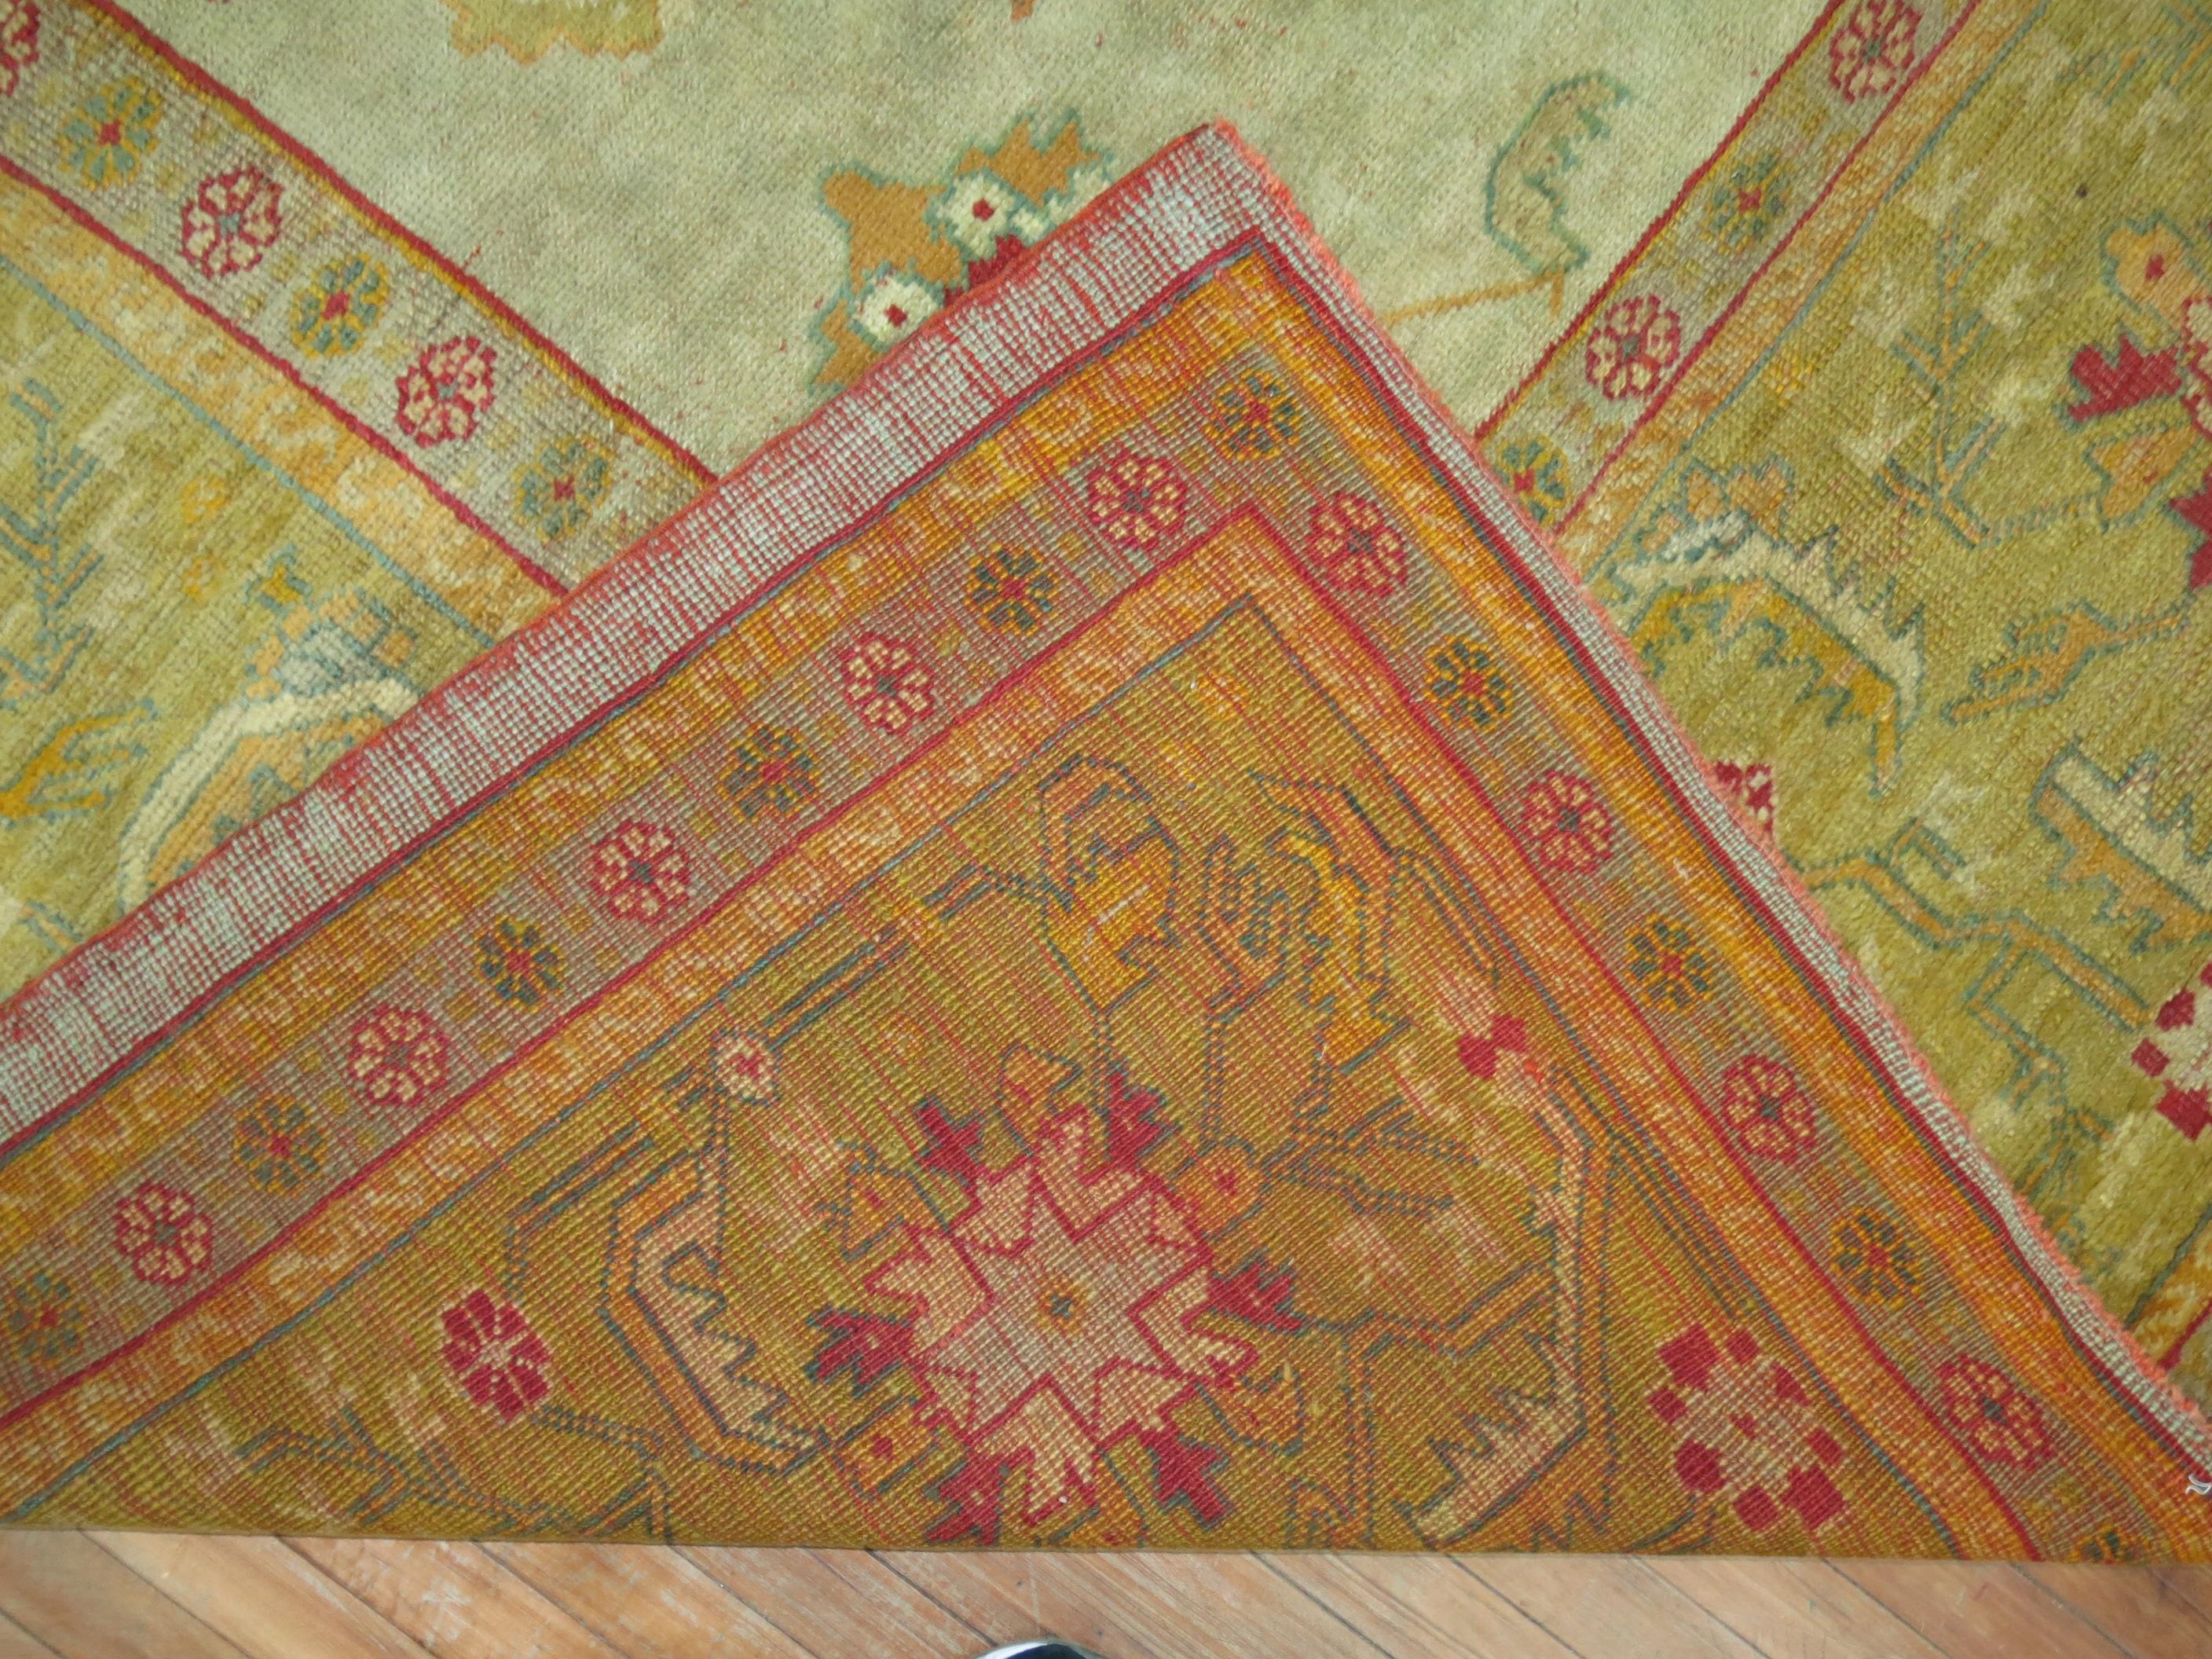 An early 20th century square size antique Turkish Oushak featuring an-all over design in warm colors.

Measures: 12' x 12'2''

Oushak rugs originated in the small town of Oushak in west-central Anatolia, today just south of Istanbul, Turkey.